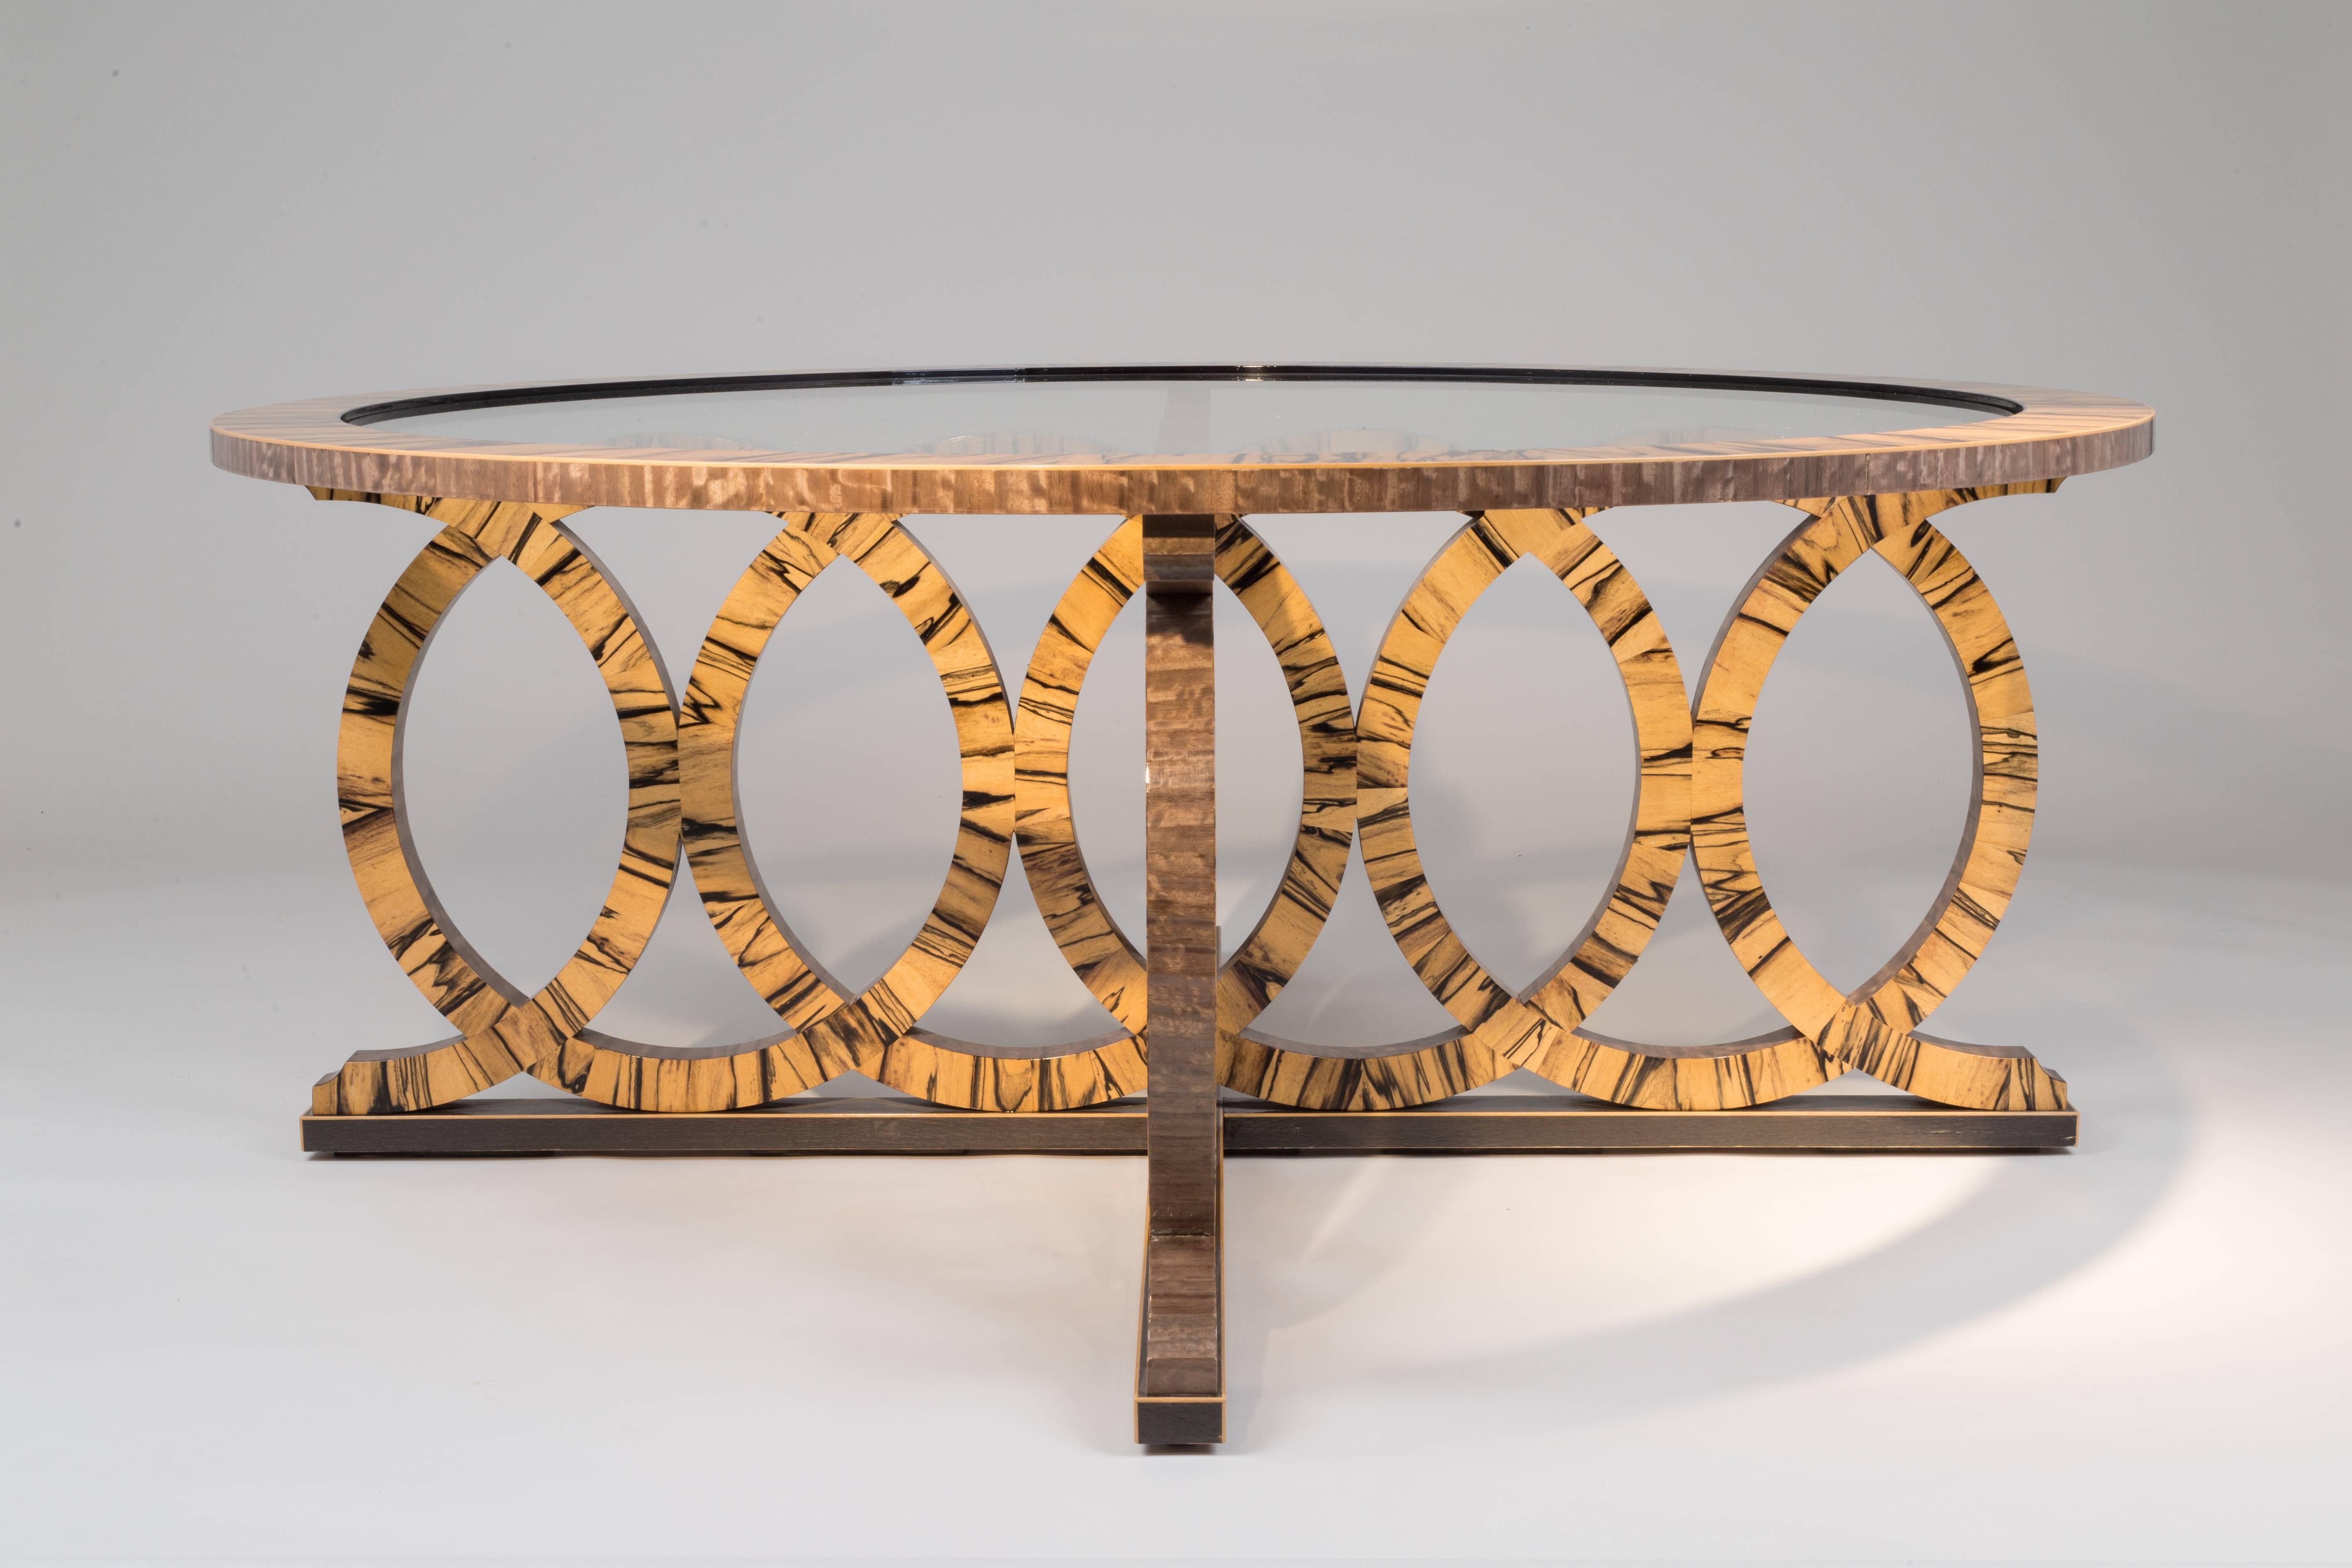 The Coco Table is more an artform than a table. On a visit to Paris, our designer stood beneath the Eiffel Tower, looked up and became inspired by the magnificent structure. From this moment the Coco Table was born....

Edged with Eucalyptus and